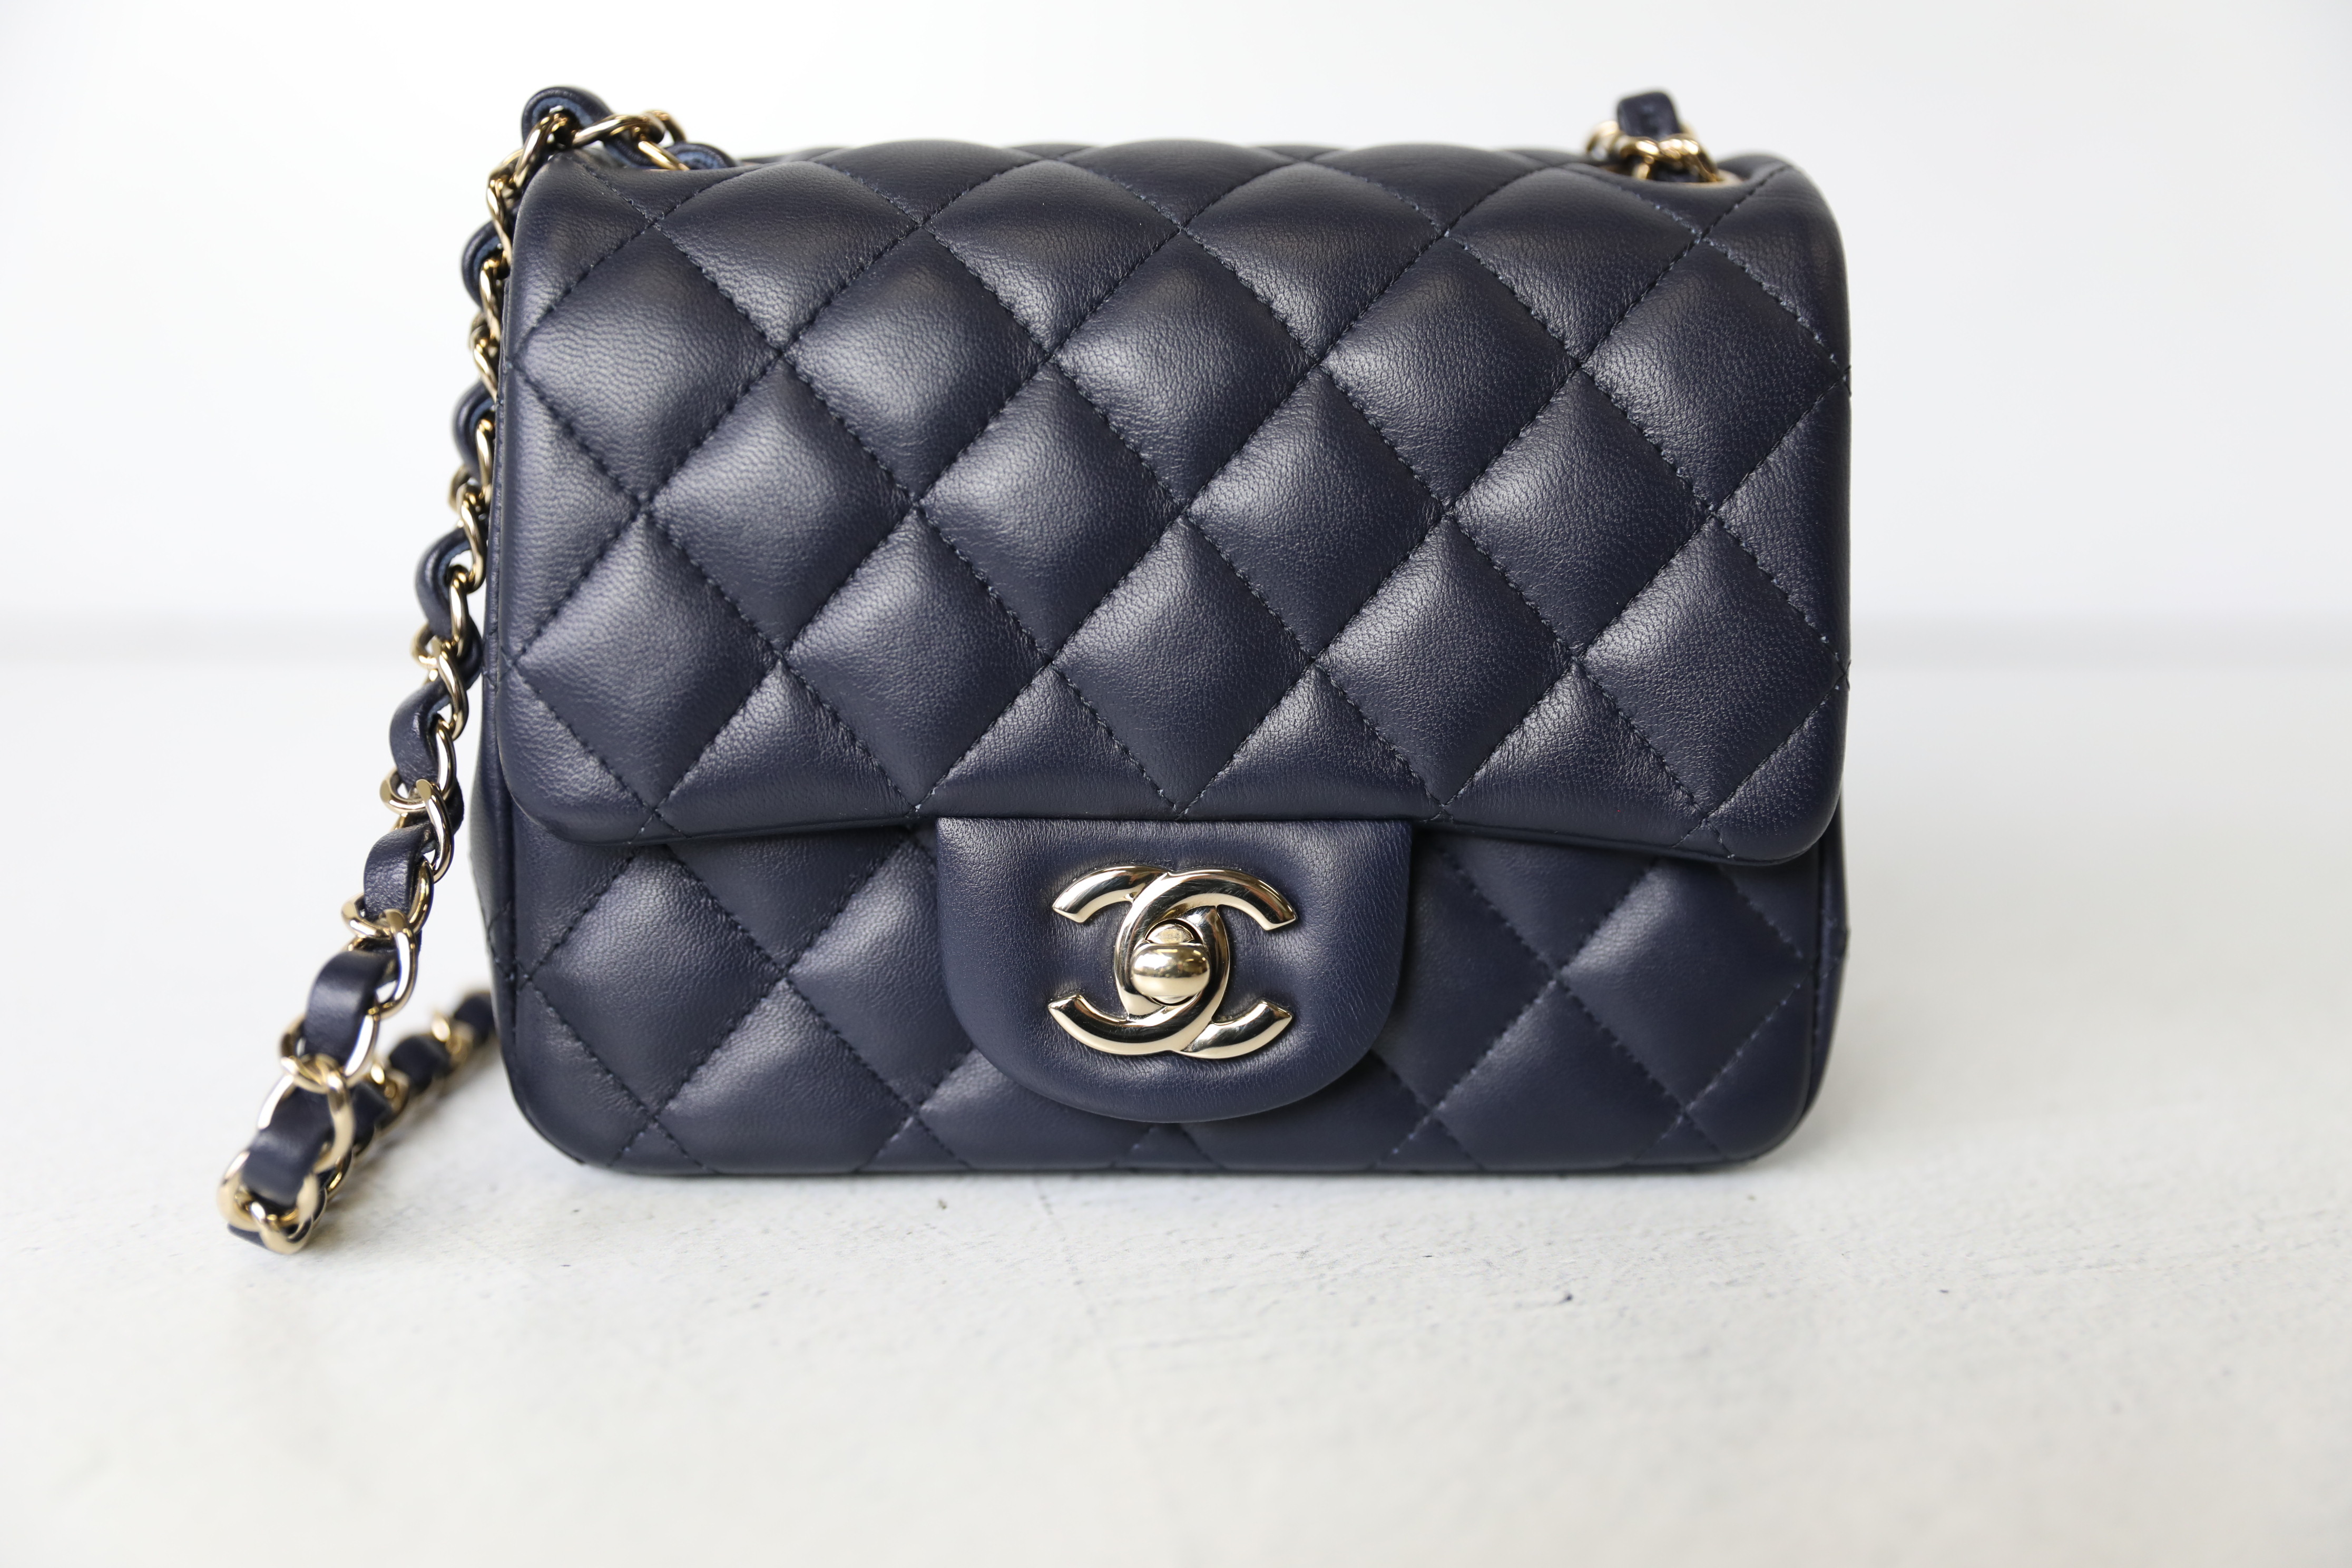 Chanel Vintage Medium, Black Lambskin with Gold Hardware, Preowned